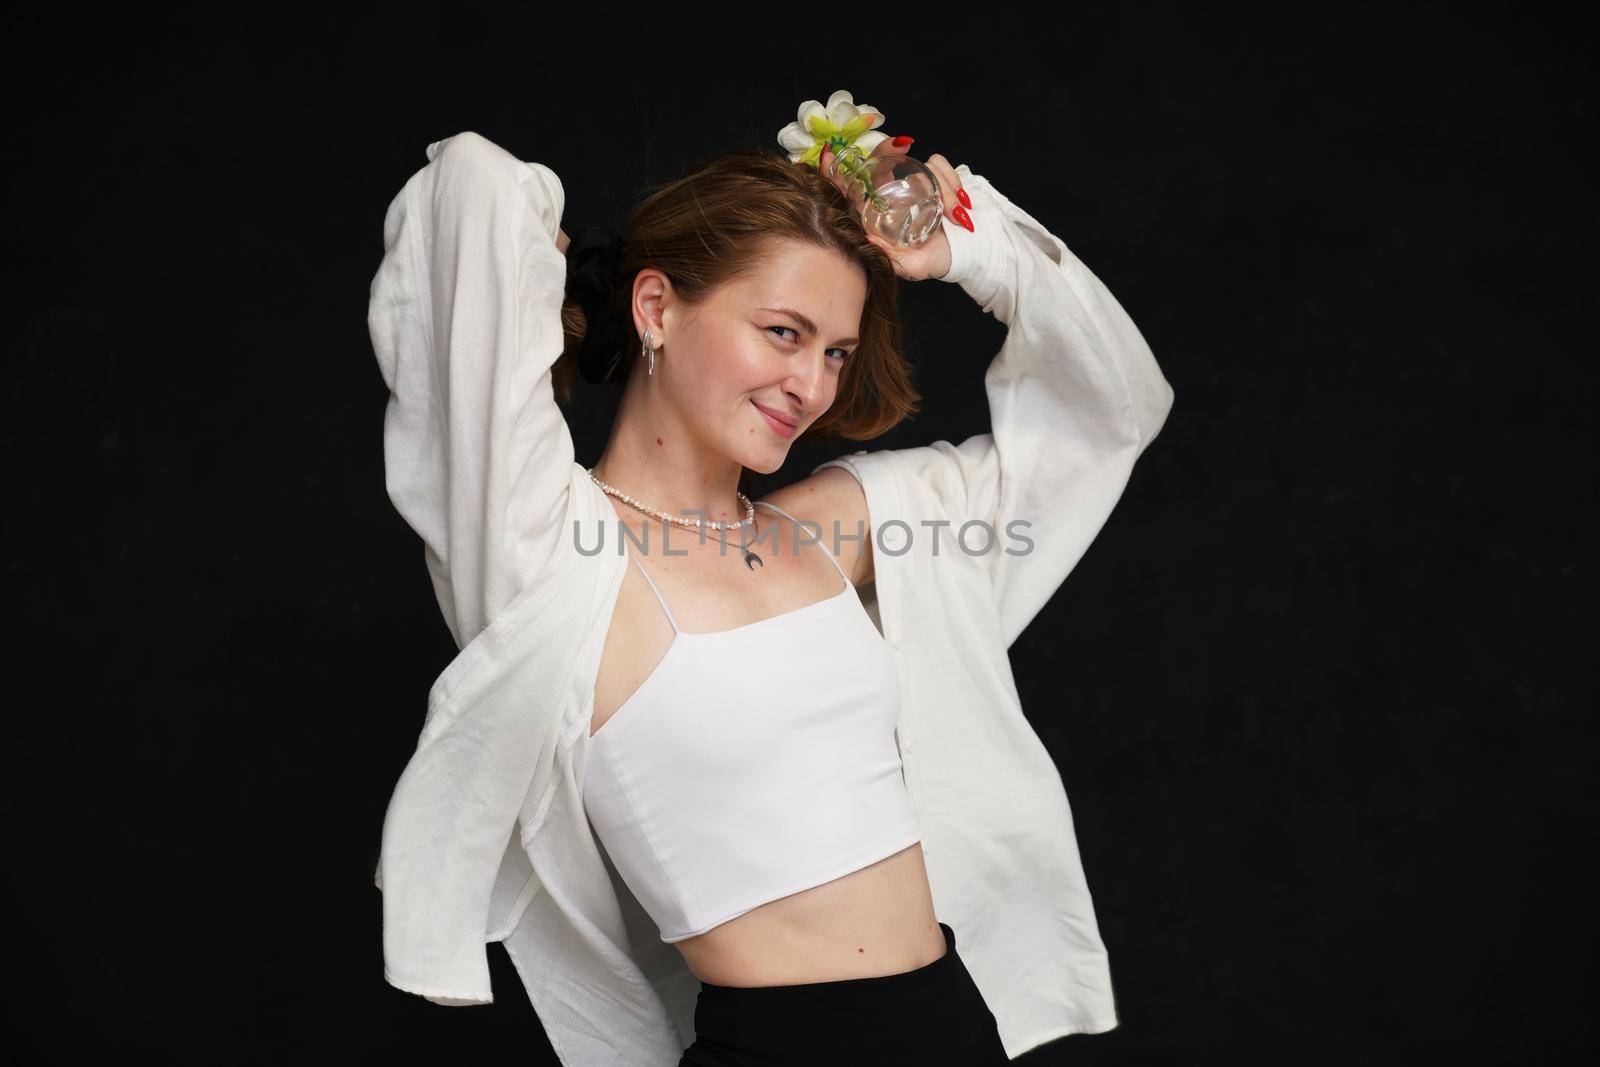 cute smiling caucasian girl with fluttering hair posing with a flower in her hand in light clothes on a black background